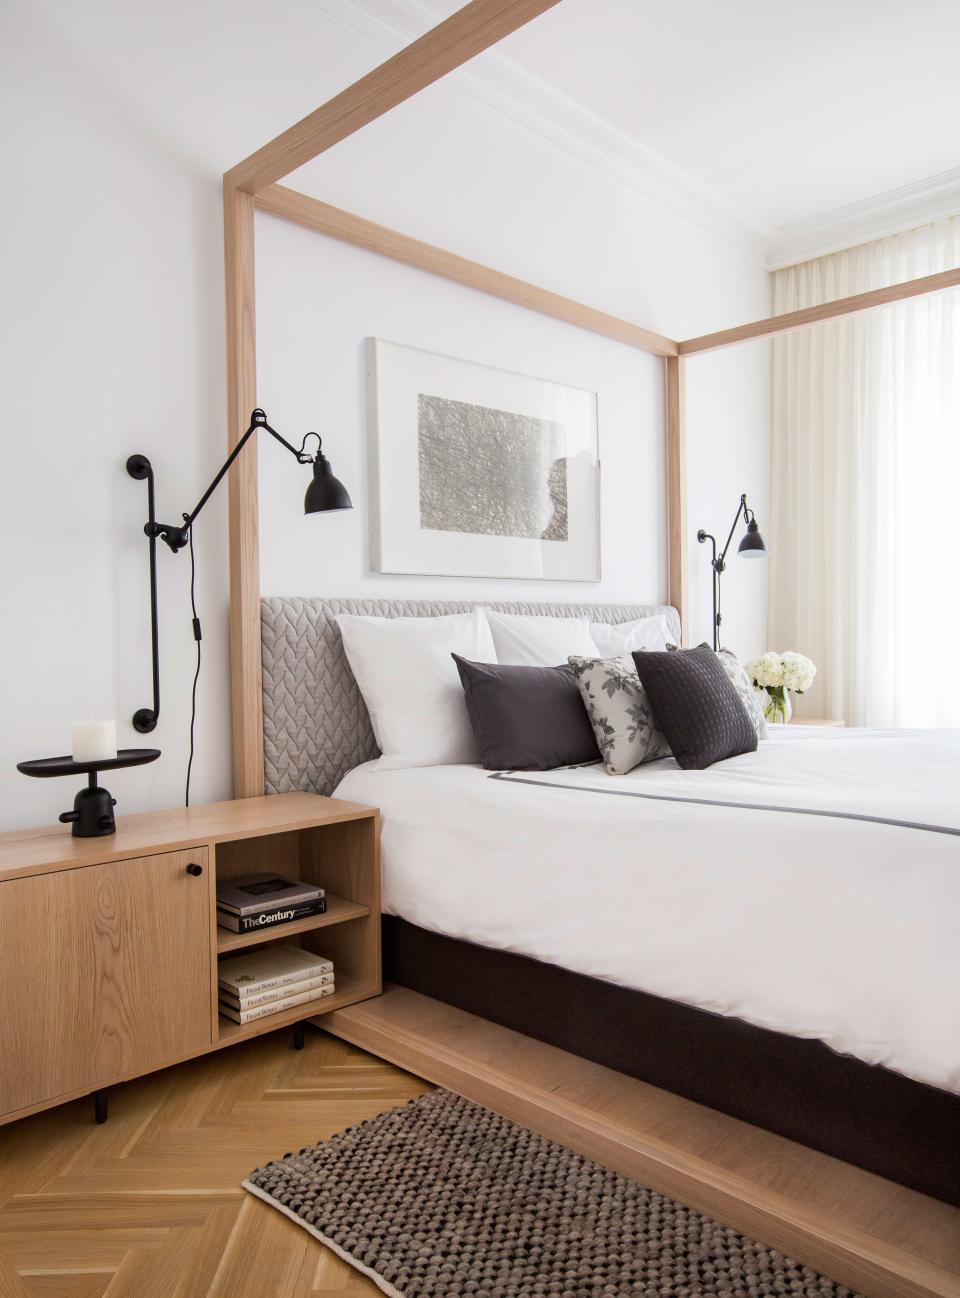 A minimalist custom-designed four-poster bed anchors the master bedroom. “It‘s really seamless woodwork inspired by Japanese traditions; there’s no hardware,” says Grehl of the piece, which was built by A.B. Hornbake (as were the matching bedside tables). The adjustable reading lamps, designed in the ’20s by Bernard-Albin Gras, are from Design Within Reach. To add coziness, Grehl picked an upholstered headboard covered in Patricia Urquiola’s “Big Braid” fabric, and a textured wool carpet from Bludot.